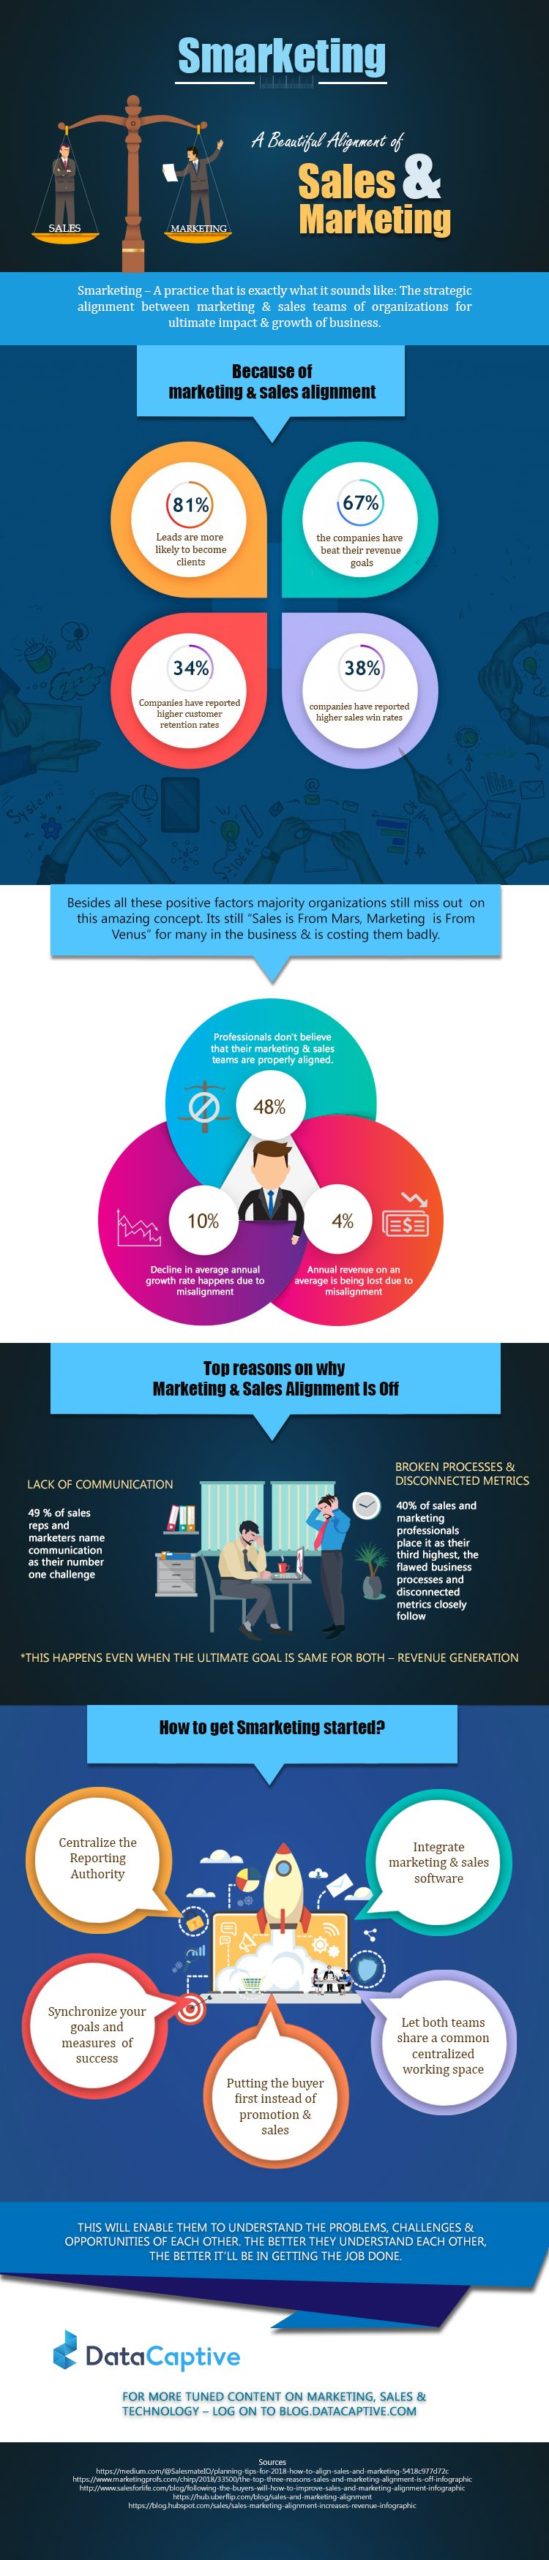 Sales and Marketing infographic